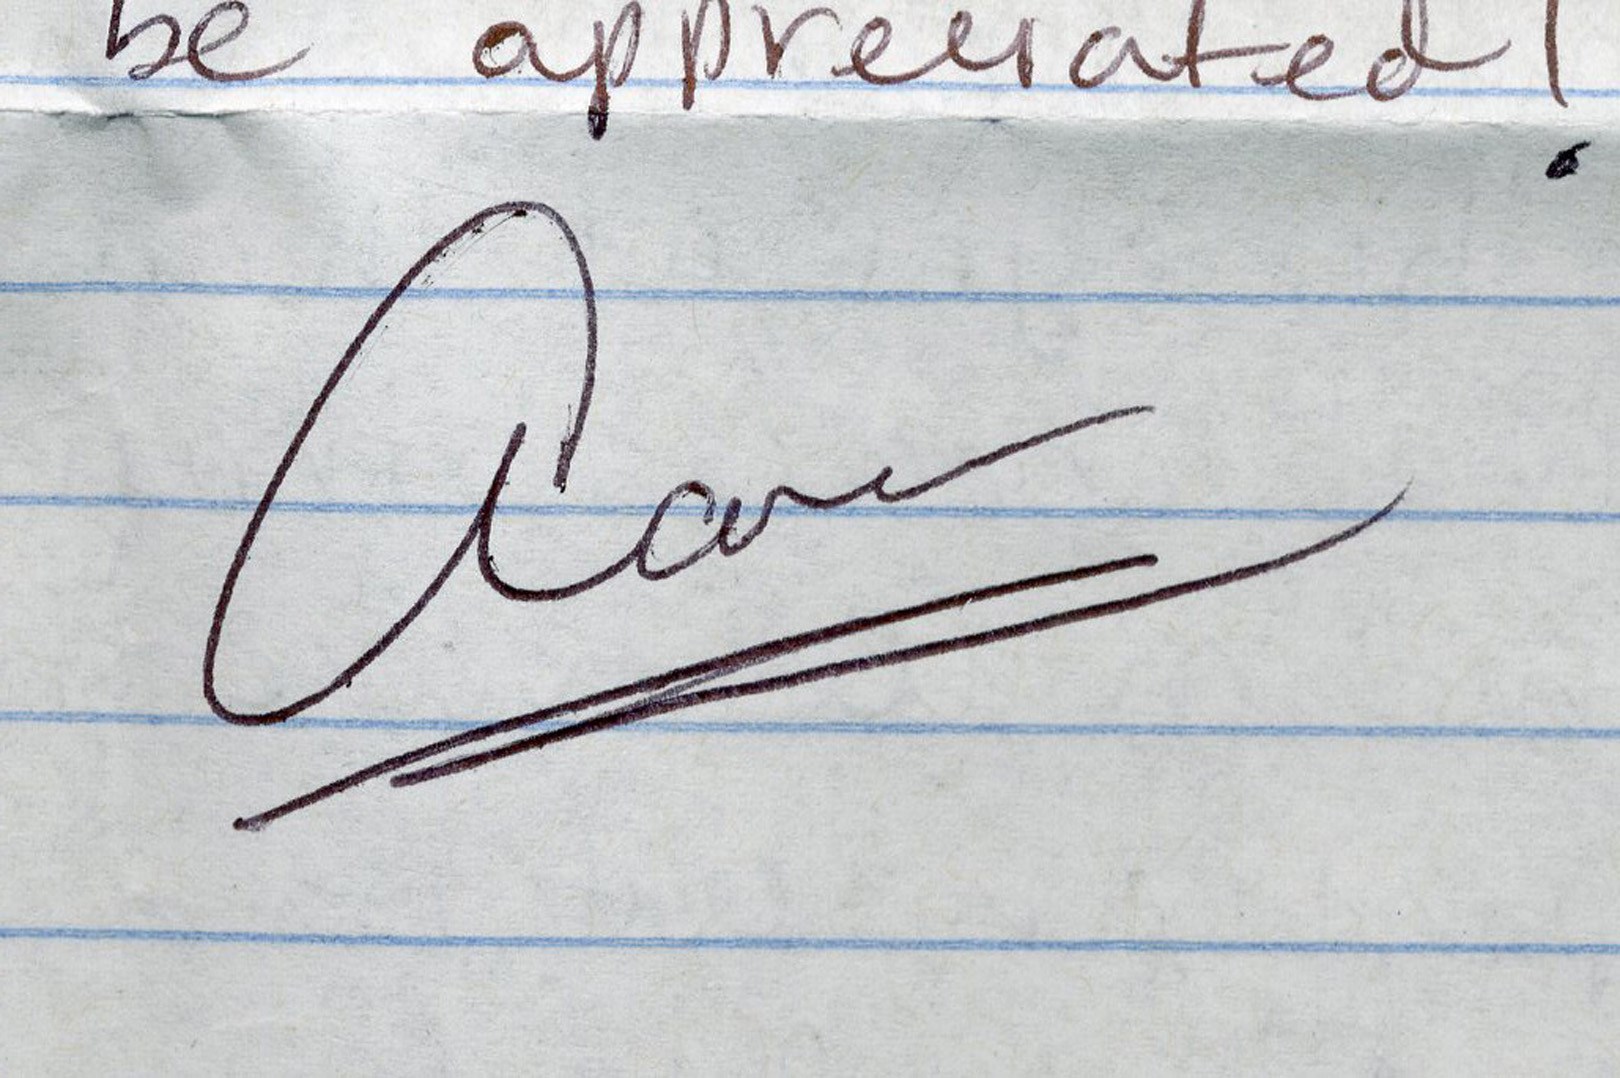 Football - Aaron Hernandez "Stay Out of Trouble" Handwritten Letter with "Unknown Substance"